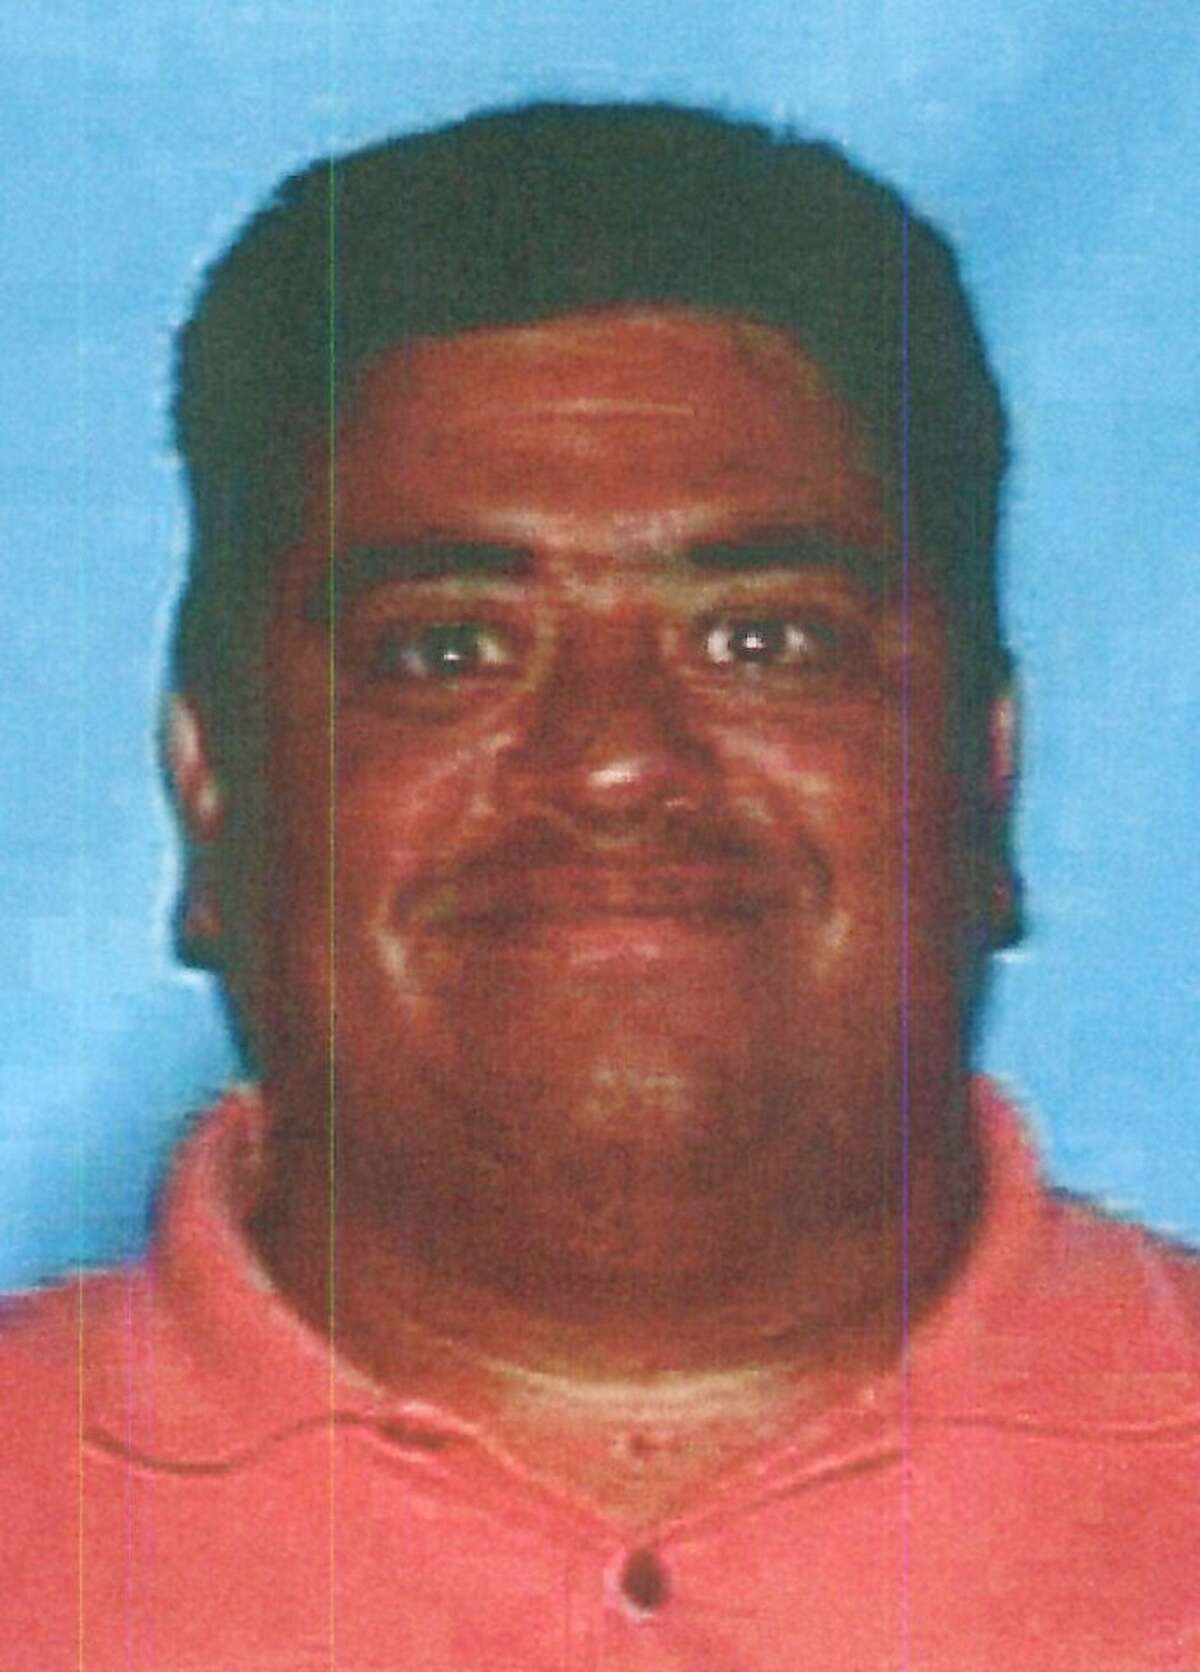 This image provided by the Department of Justice shows attorney Alfred Nash Villalobos, who was arrested by FBI agents on Tuesday Aug. 4, 2009 in Los Angeles. Villalobos was charged with obstruction of a grand jury proceeding and faces up to 10 years in prison if convicted. (AP Photo/Department of Justice)